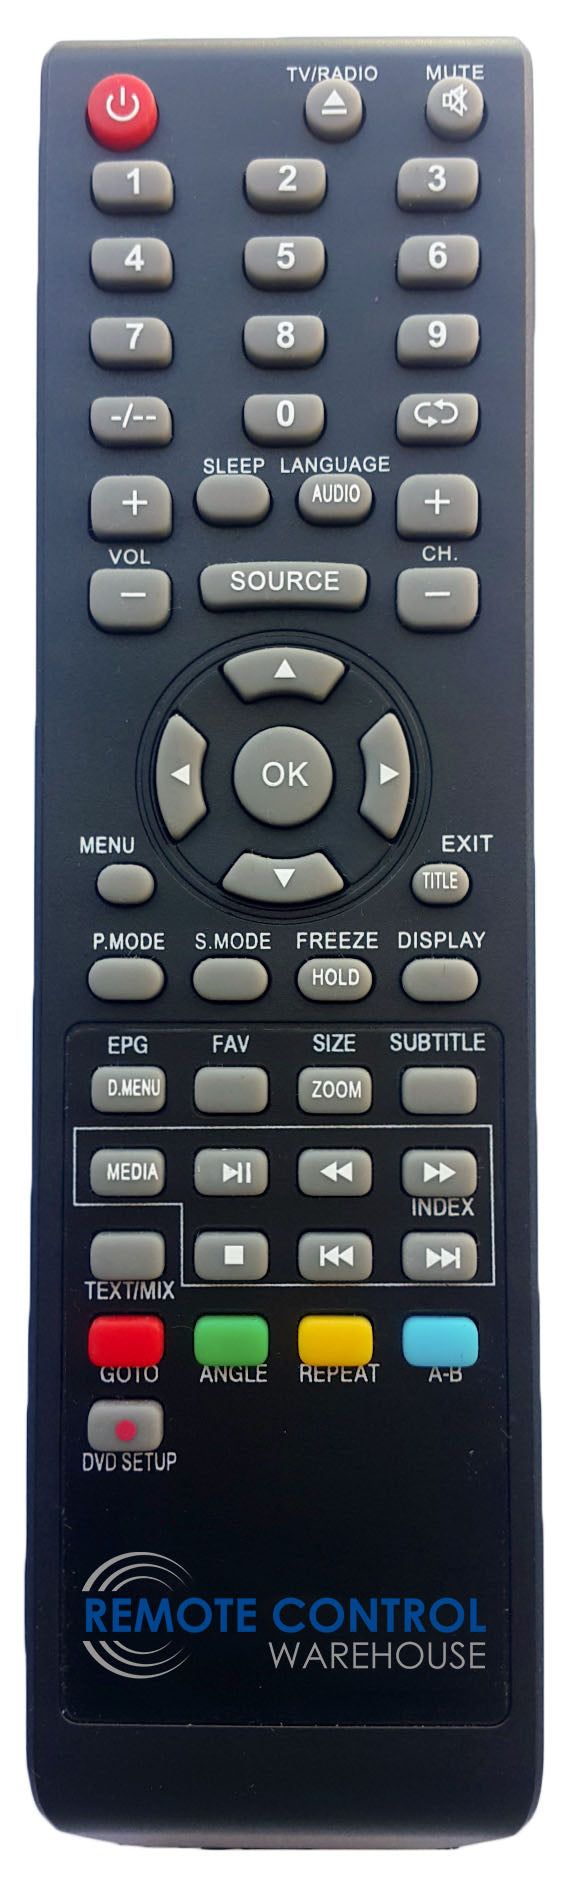 REPLACEMENT BAUHN REMOTE CONTROL SUBSTITUTE ATV-50FHD5 ATV50FHD5 LCD TV - Remote Control Warehouse